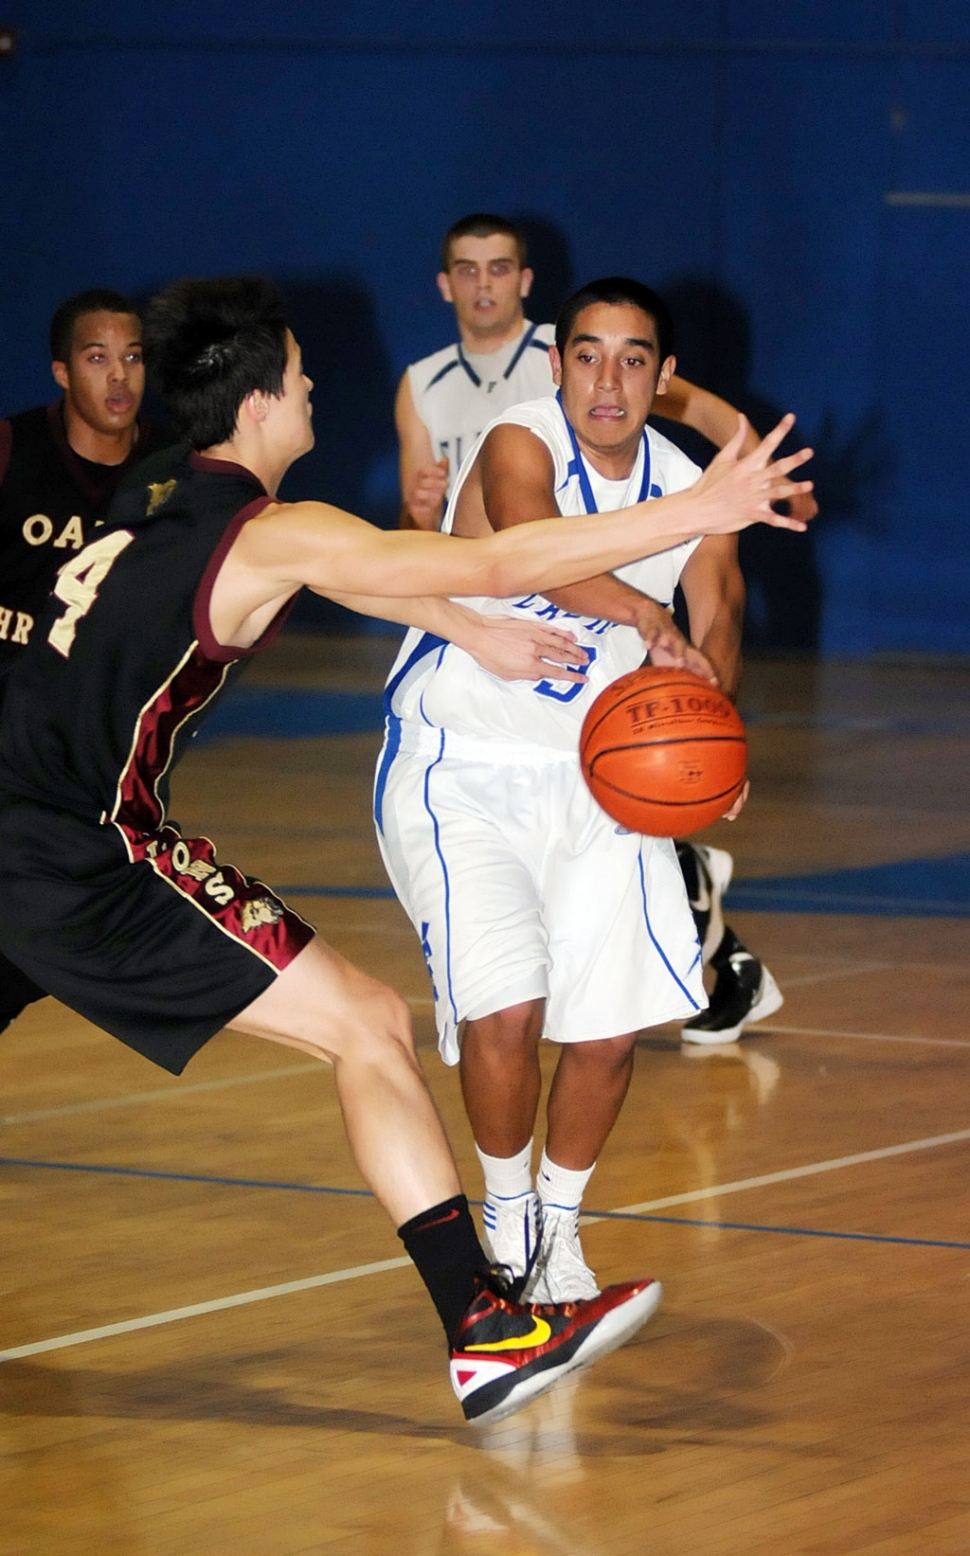 Josh Valenzuela #23 passes the ball to his teammate. Valenzuela contributed 9 points.